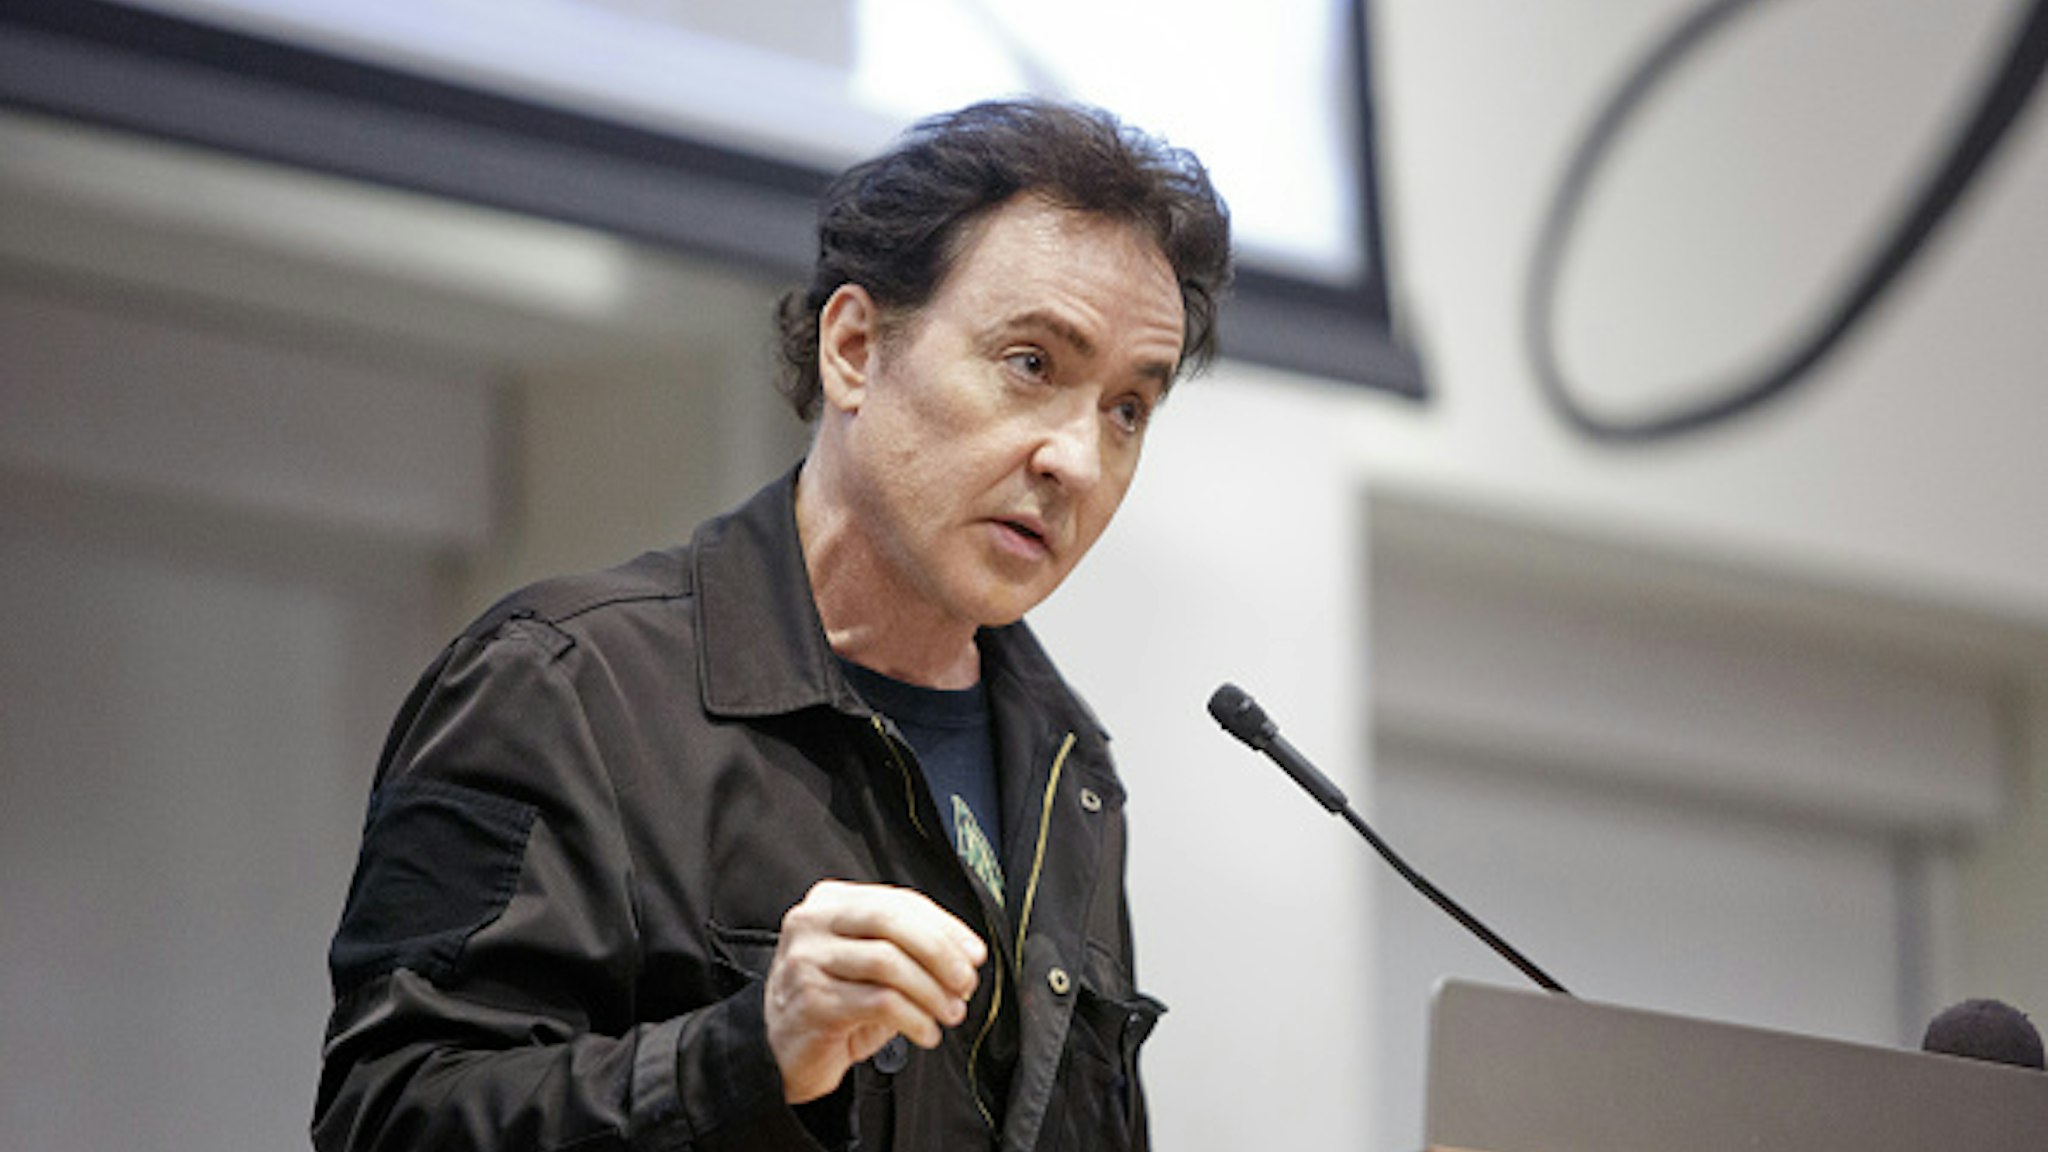 Actor John Cusack speaks during a Chicago Teachers Union Strike Authorization Vote Rally in Chicago, Illinois, U.S., on Tuesday, Sept. 24, 2019. Mayor Lori Lightfoot has been studying lots of numbers as she prepares Chicago's budget, and her first big test may come from the citys teachers this week.